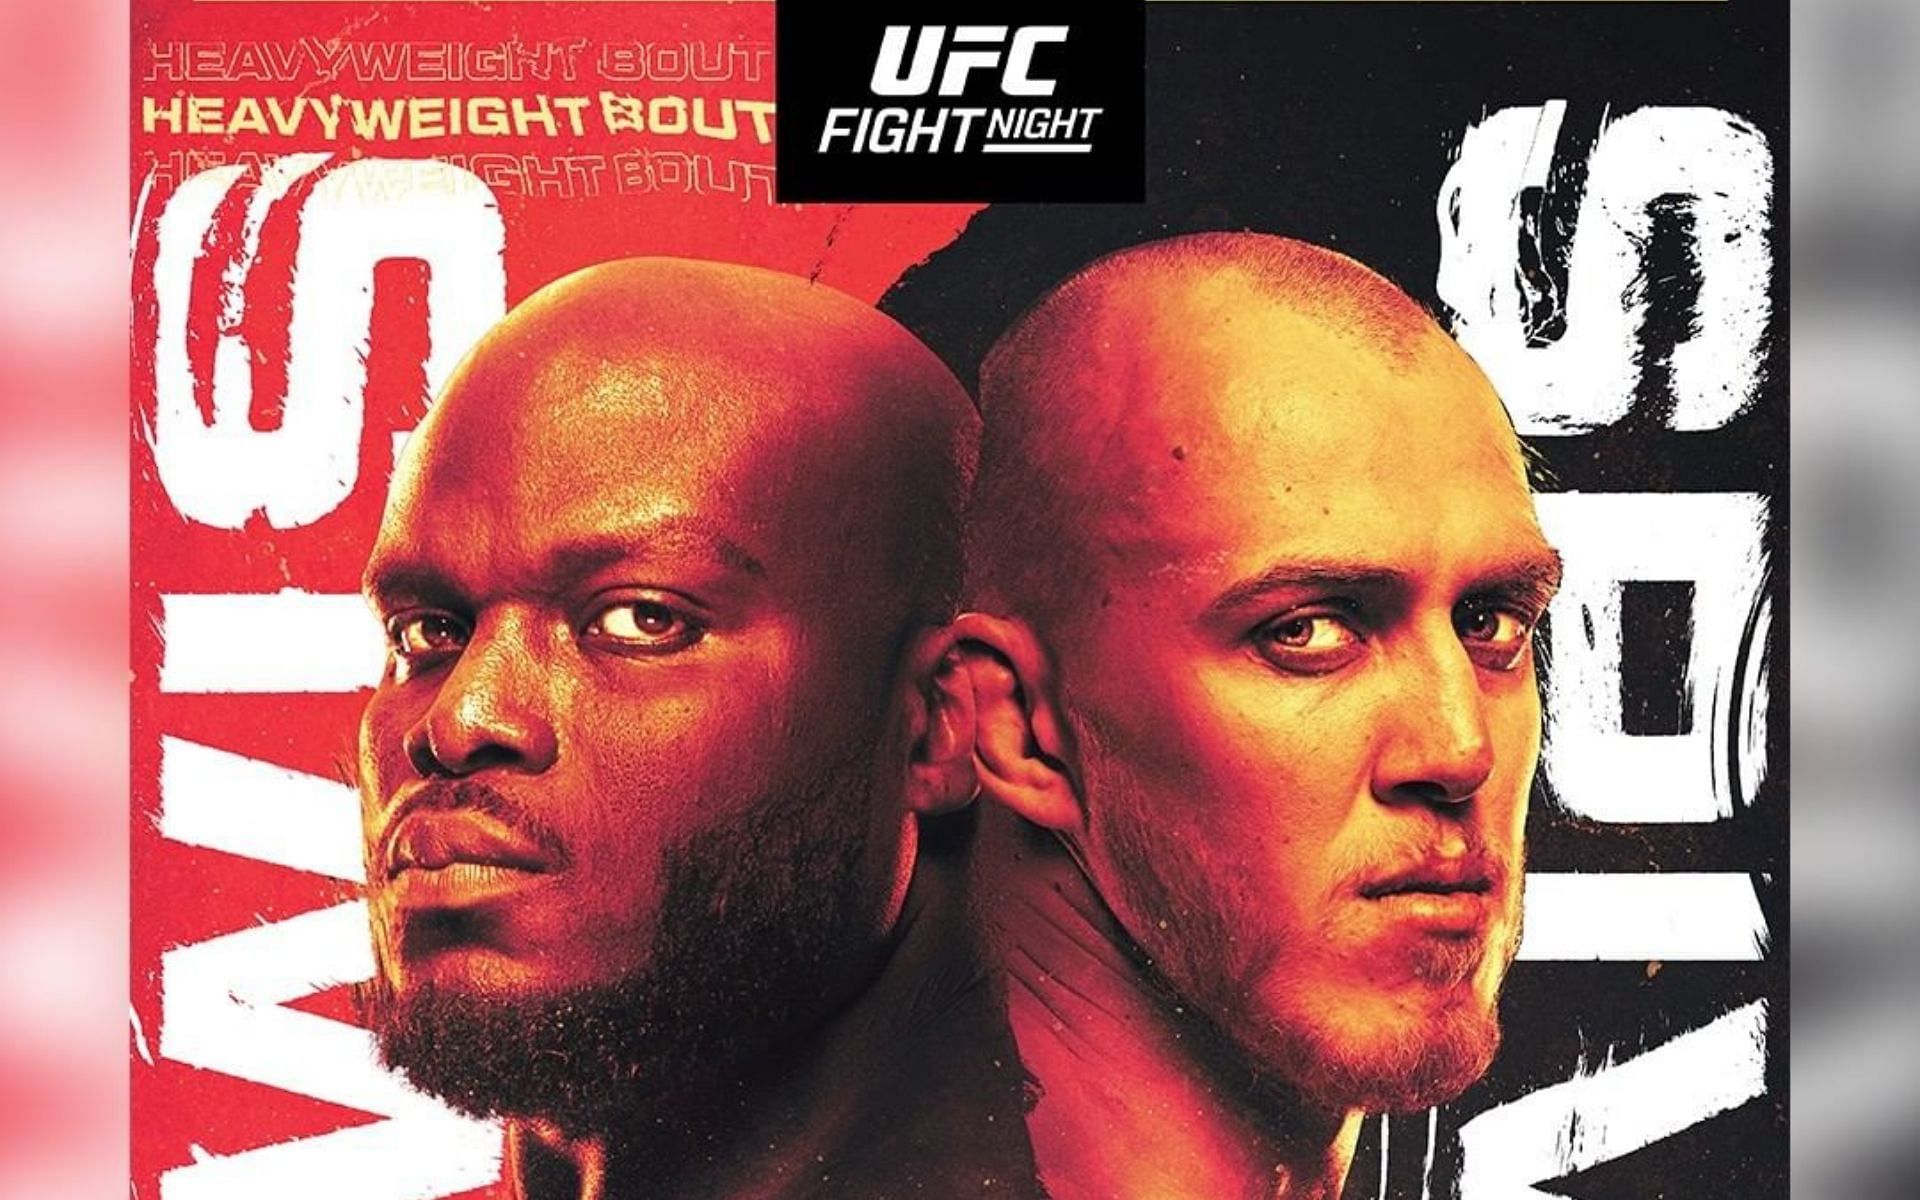 UFC Fight Night Lewis vs Spivac: Full Main Card Preview, Predictions and Odds for Derrick Lewis vs Sergey Spivac at UFC Vegas 68